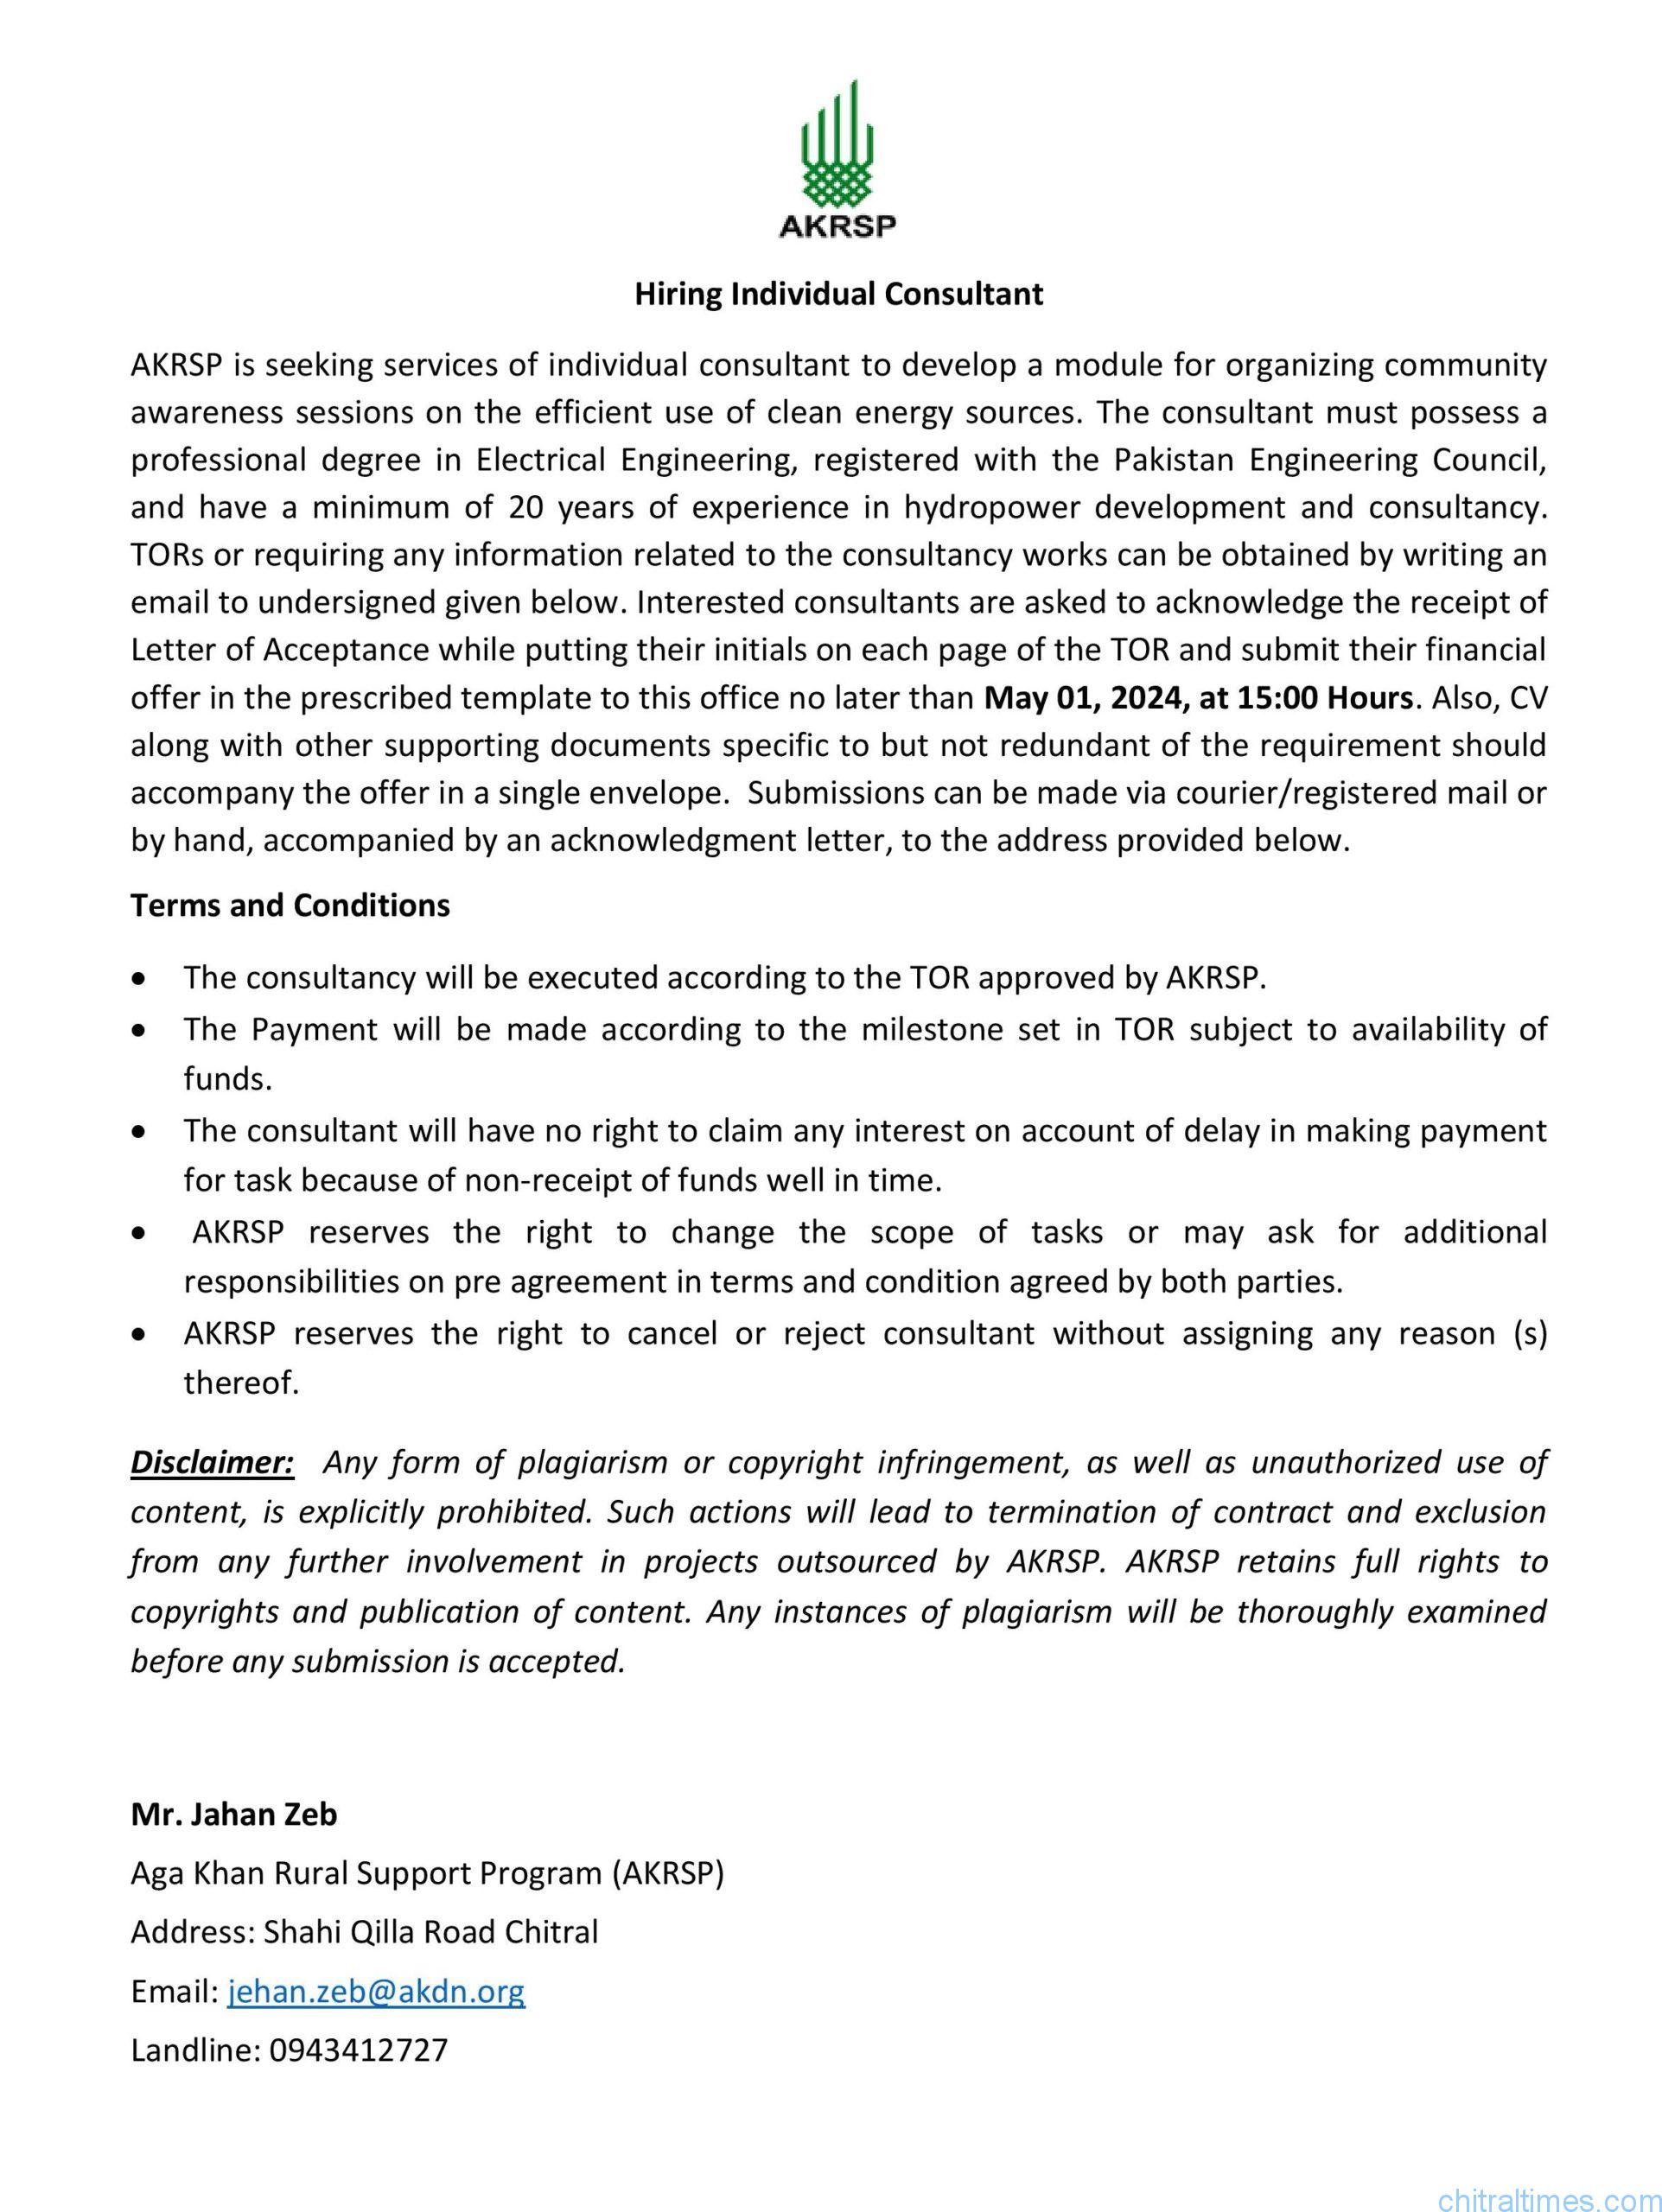 chitraltimes akrsp advertisement for hiring individual consultant scaled